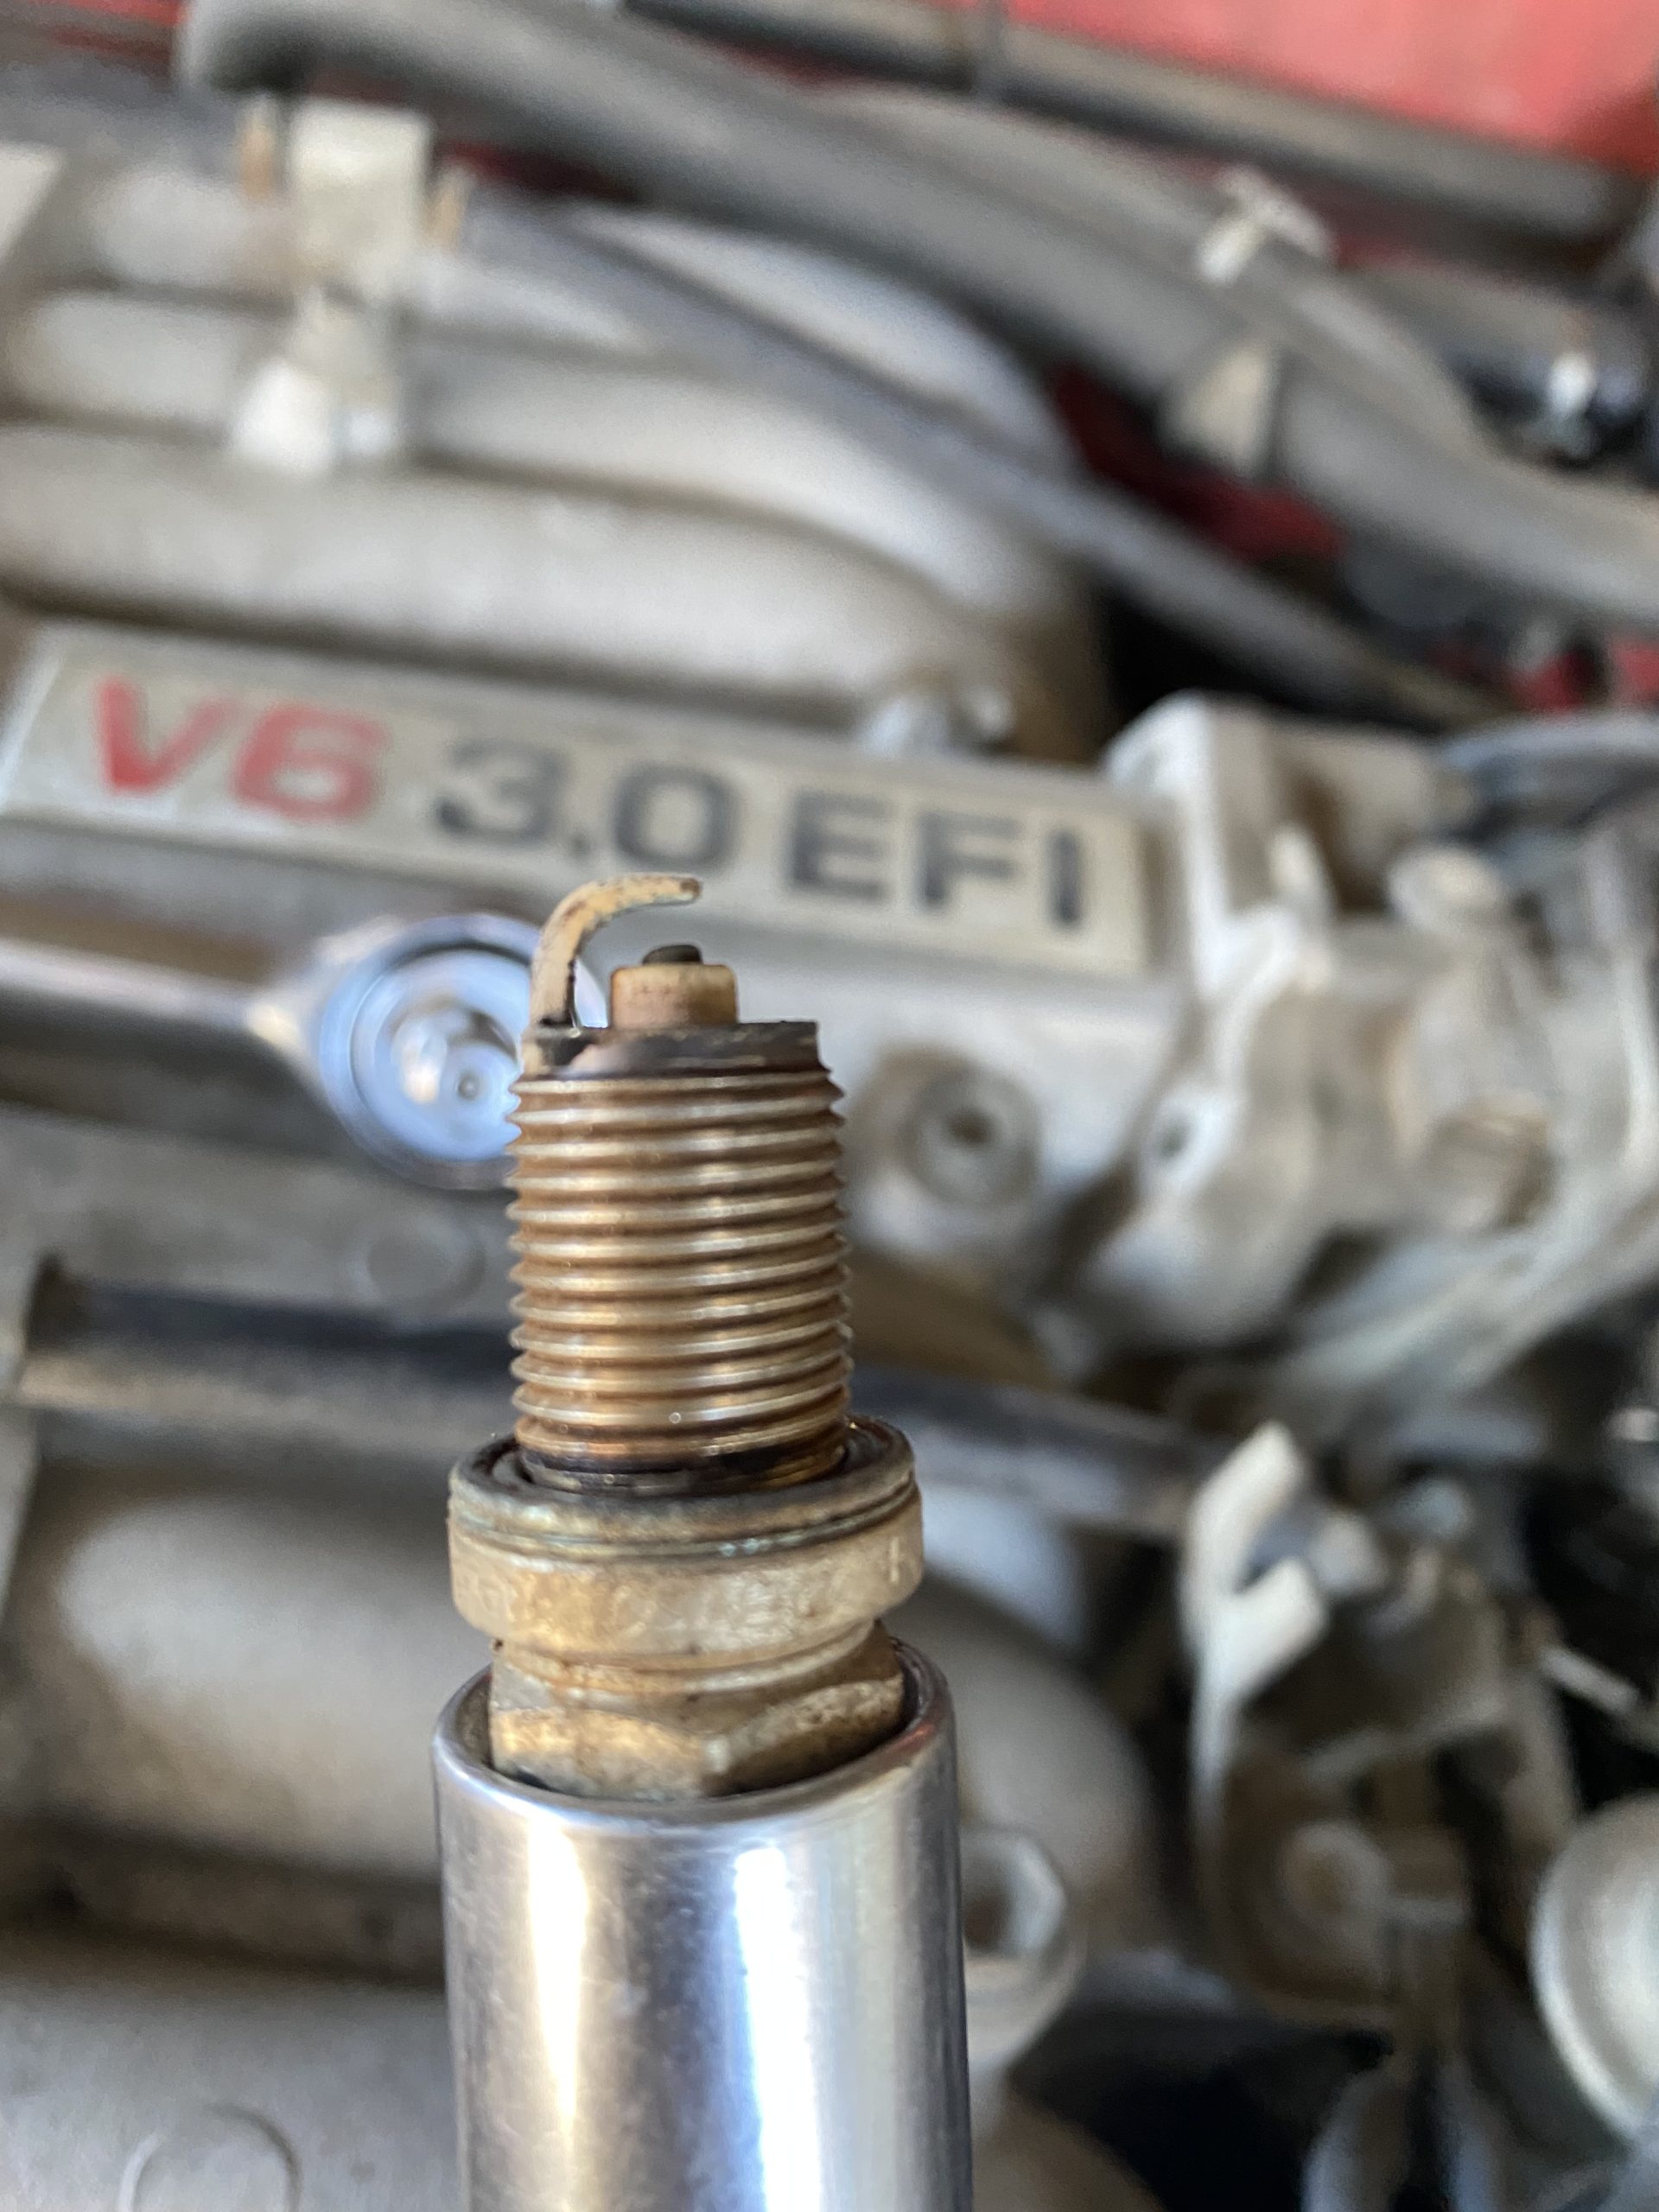 Check your spark plugs